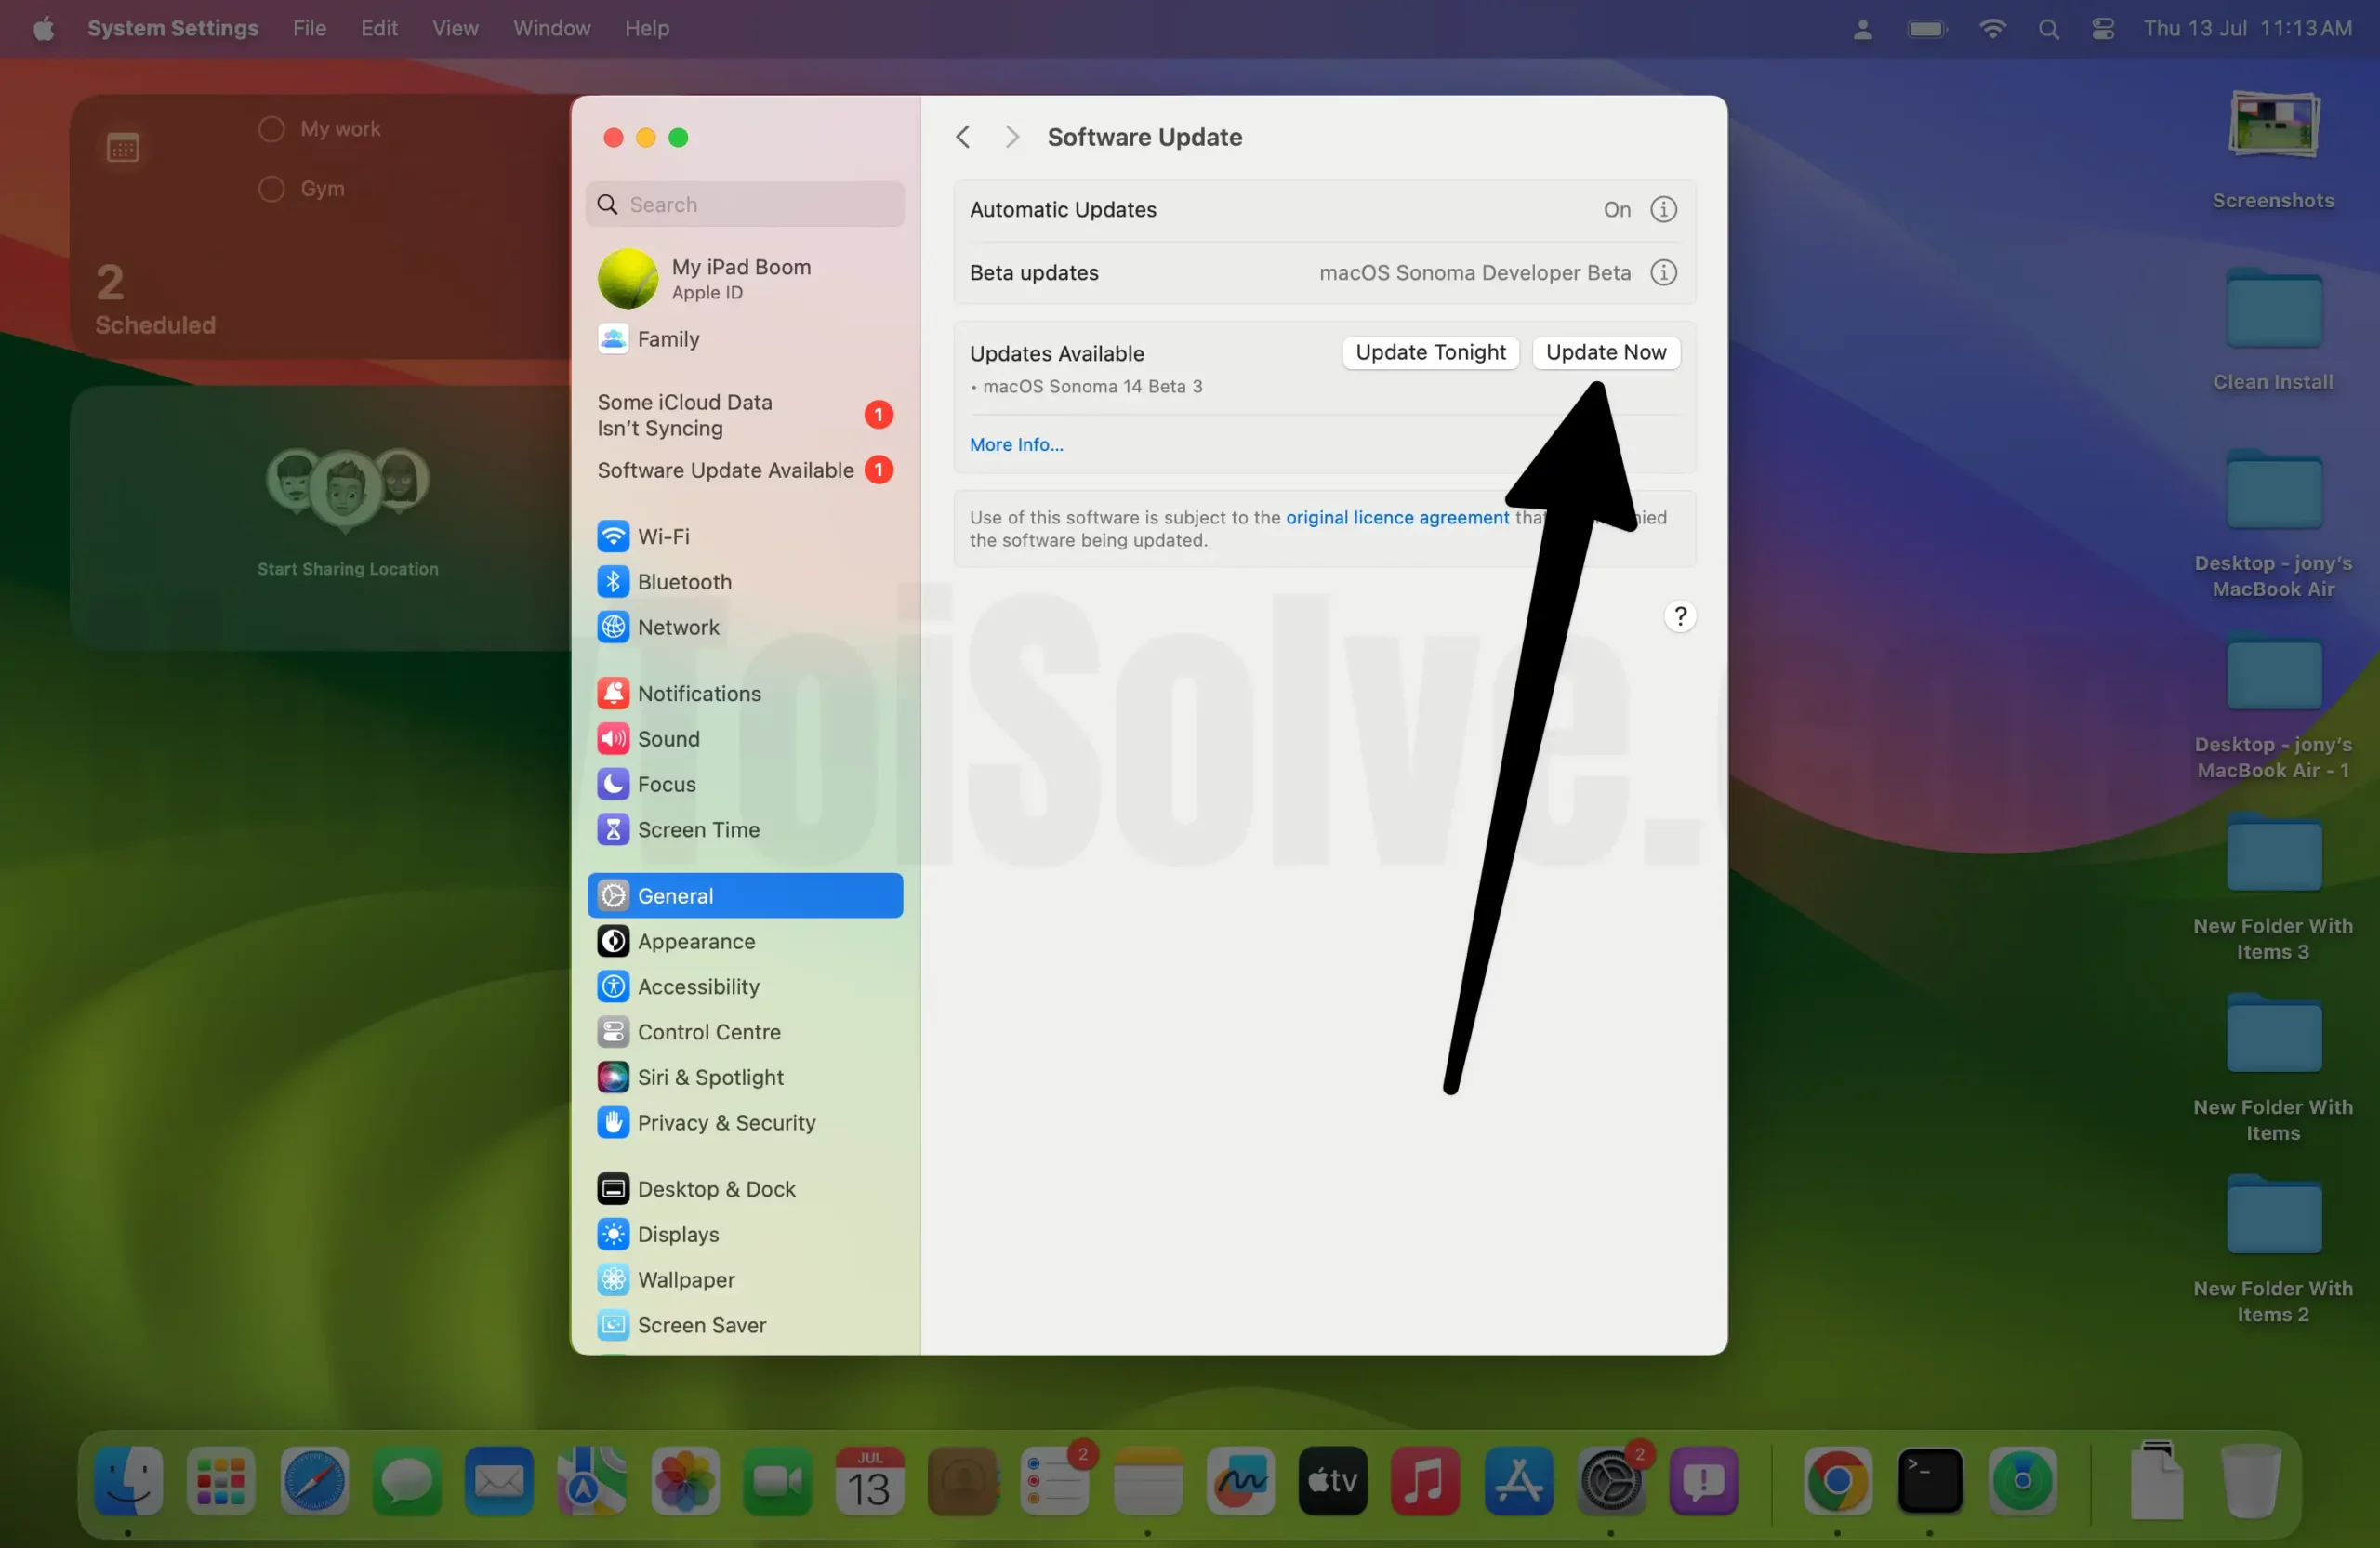 Install macOS Software Update on Mac